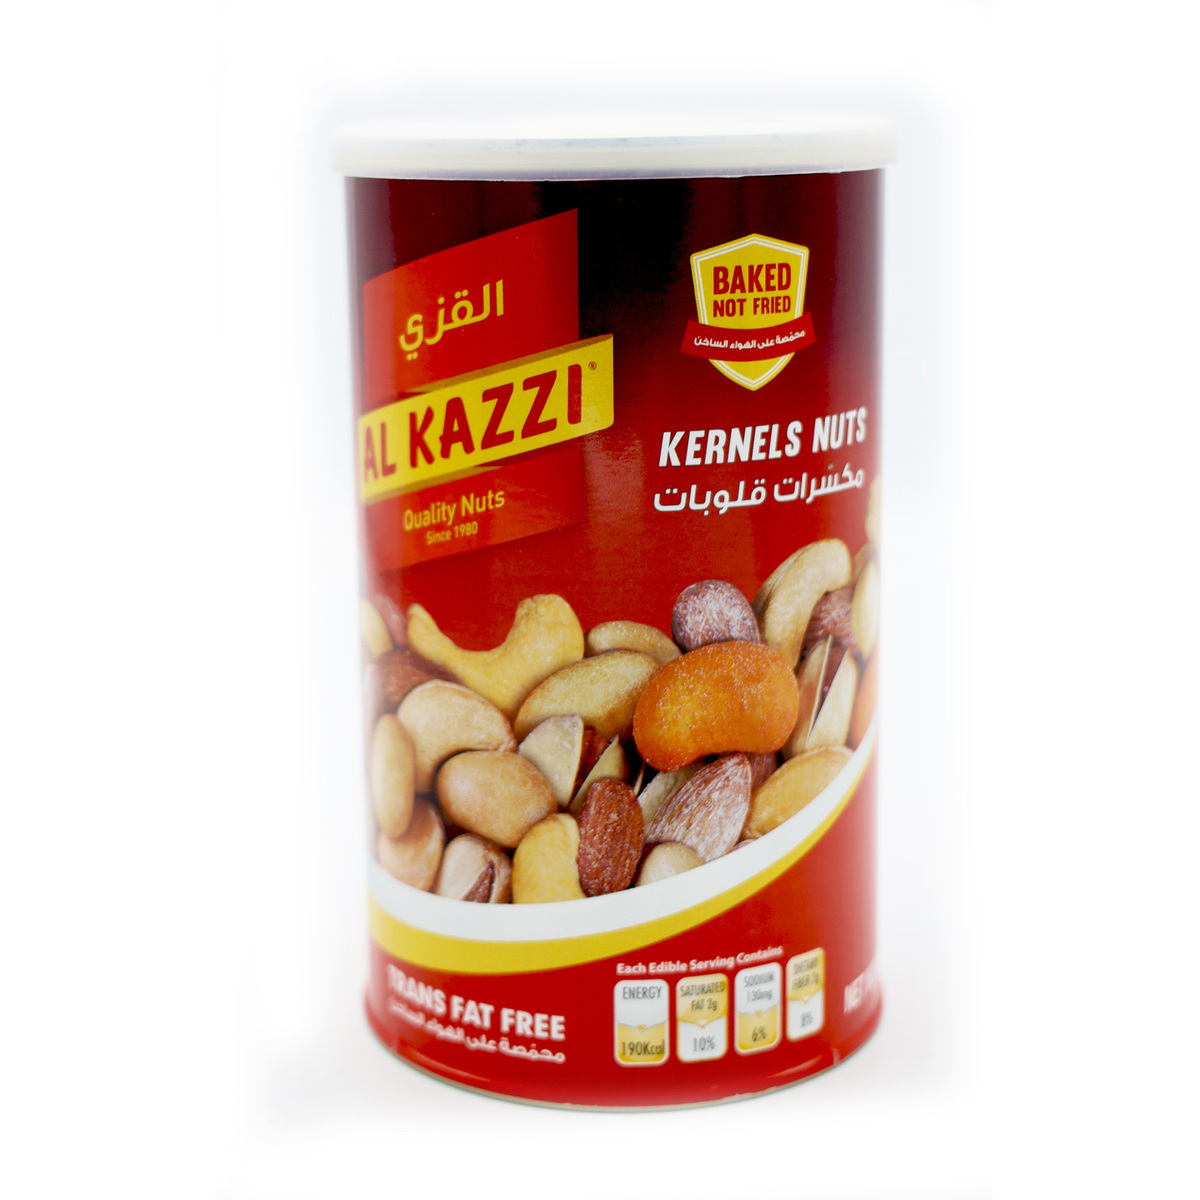 Al Kazzi Mixed Kernels Nuts 450g Online at Best Price | Nuts Processed ...